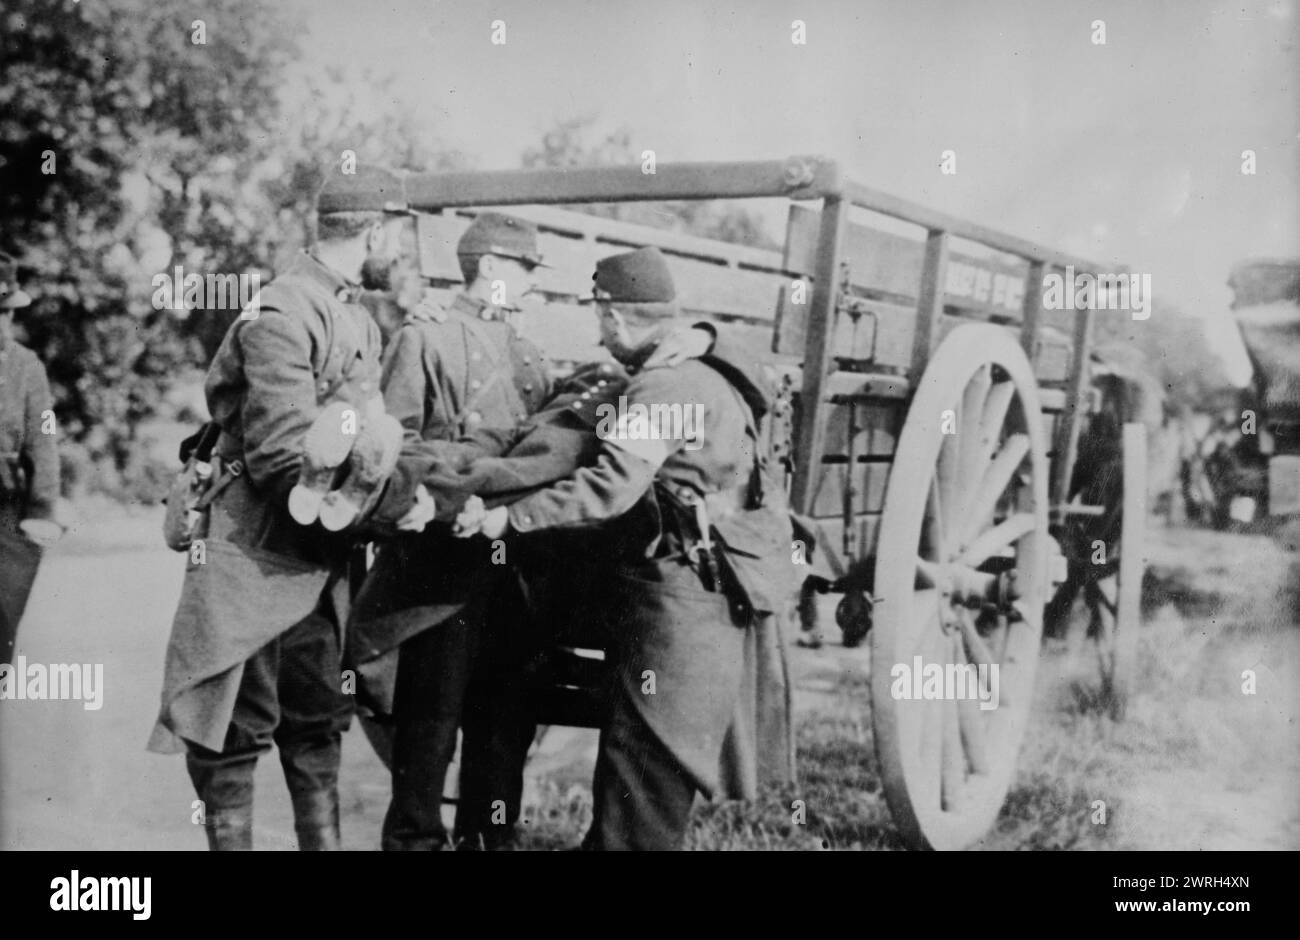 French pick up dead near Charleroi, 21 Oct 1914 (date created or published later). French soldiers putting a dead body into a cart, after the Battle of Charleroi (Battle of the Sambre) which was took place on August 21, 1914 in Belgium. Stock Photo